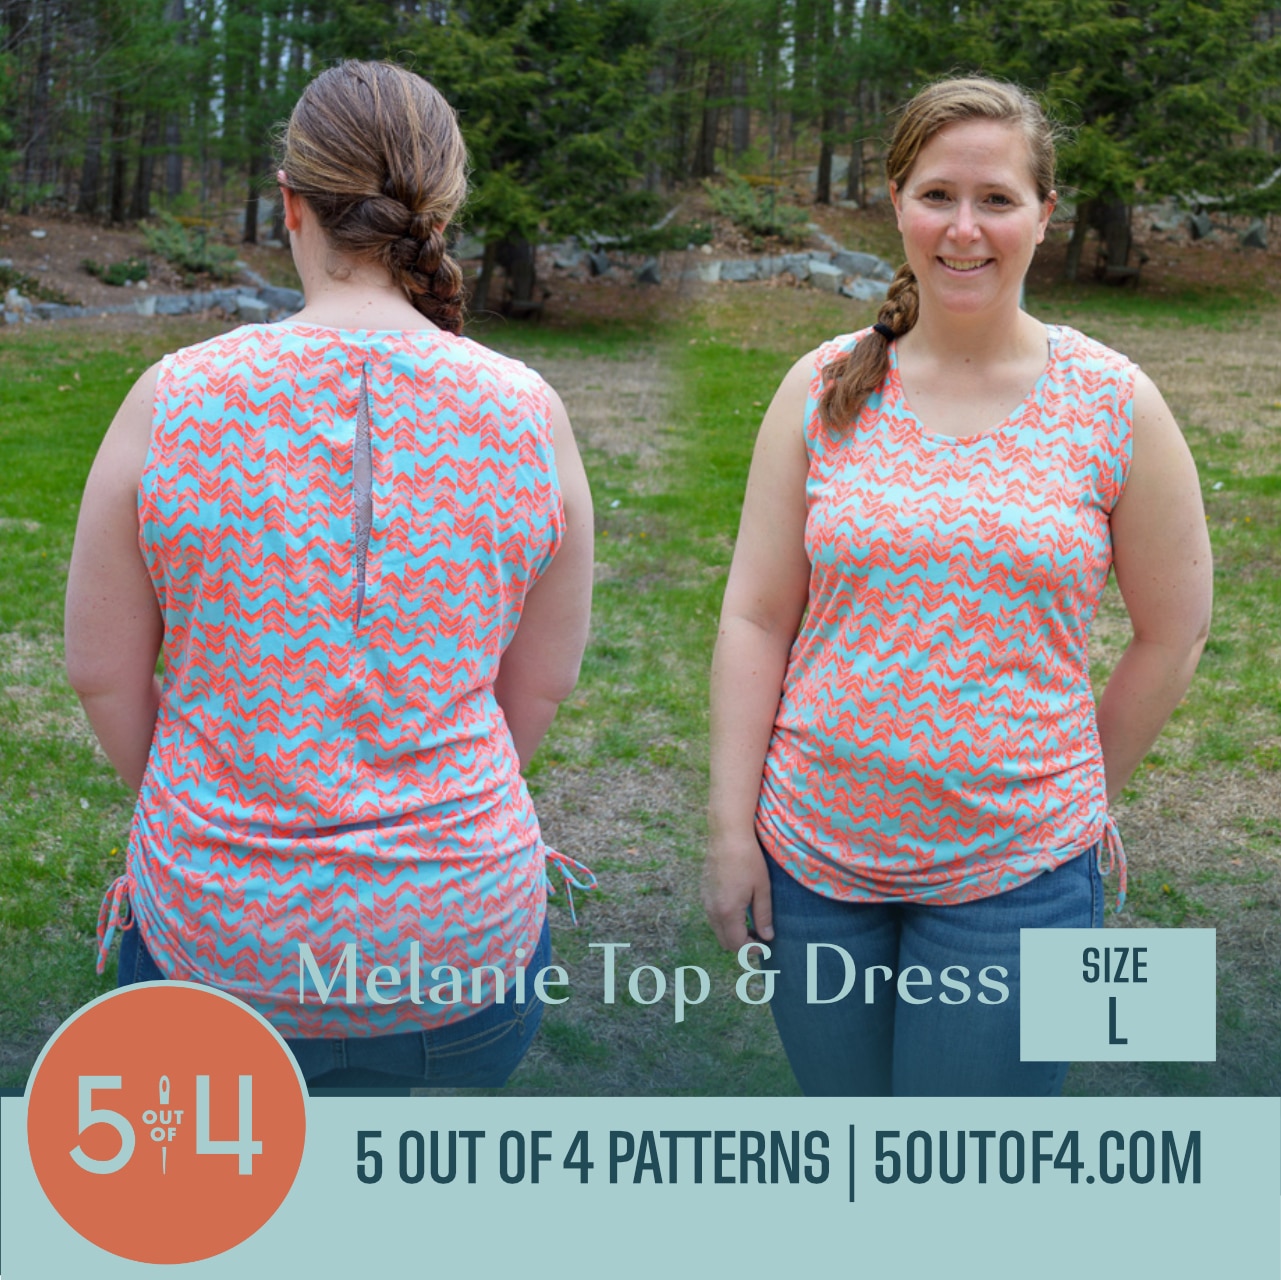 Melanie Top and Dress - 5 out of 4 Patterns